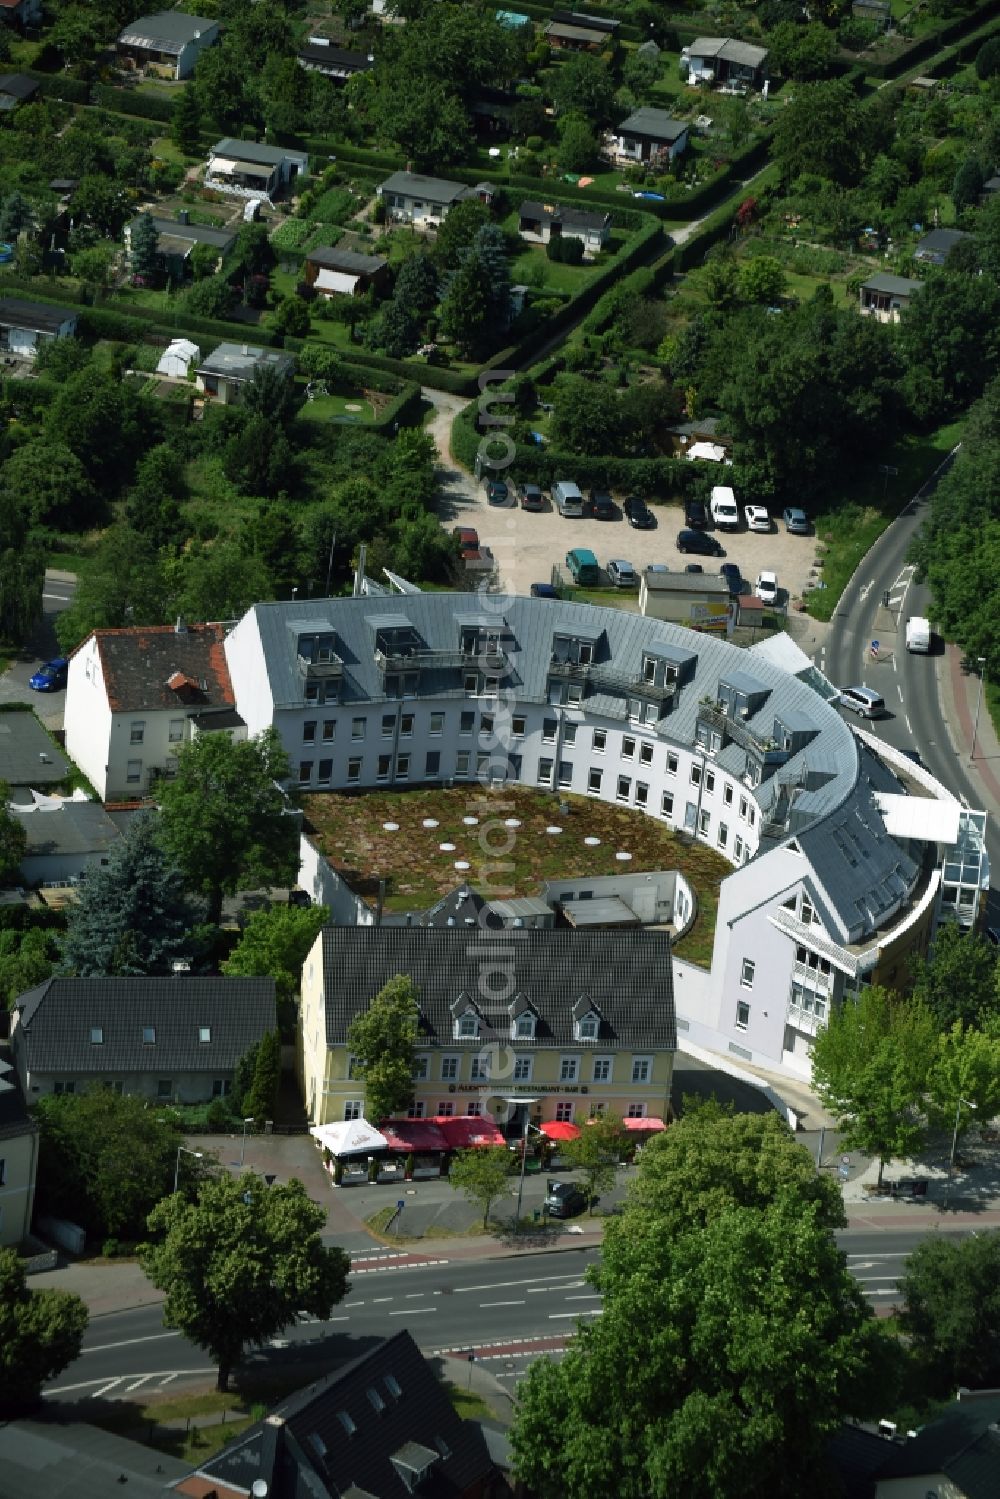 Magdeburg from above - Residential a semi-circular multi-family house settlement sheet at the Halberstaedter Chaussee in the Ottersleben district, in Magdeburg in Saxony-Anhalt